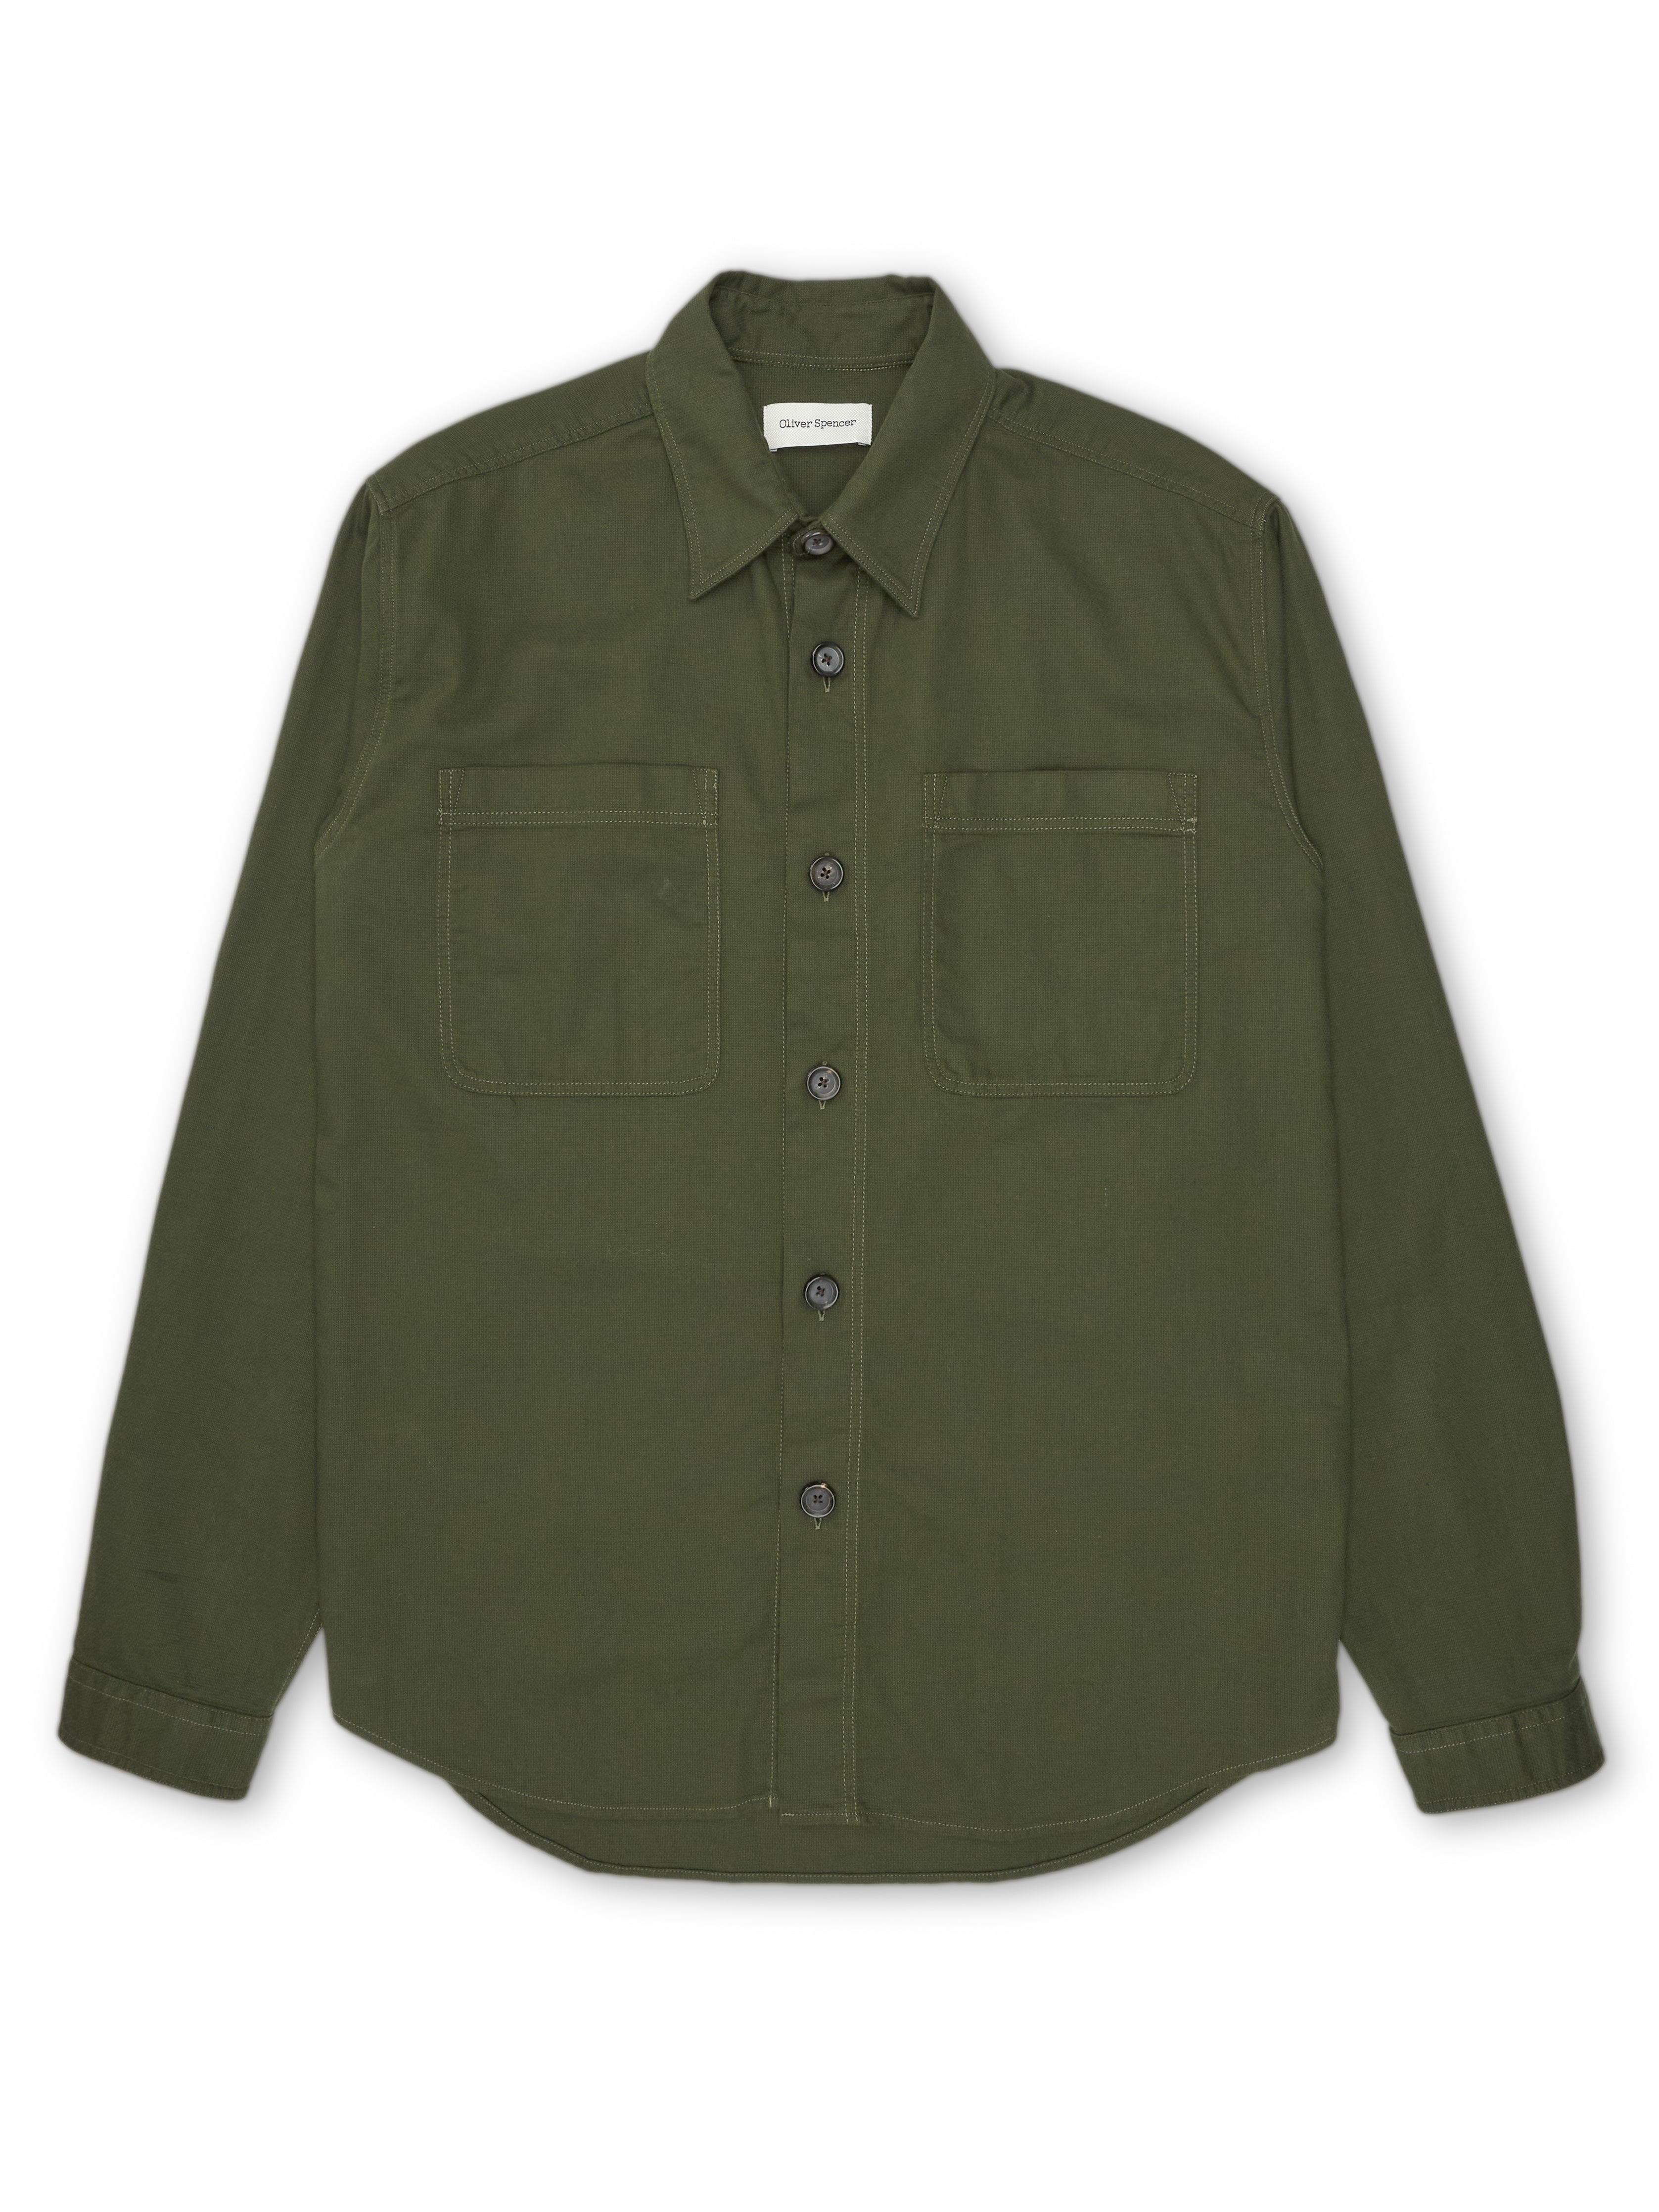 Treviscoe Shirt Kildale Forest Green